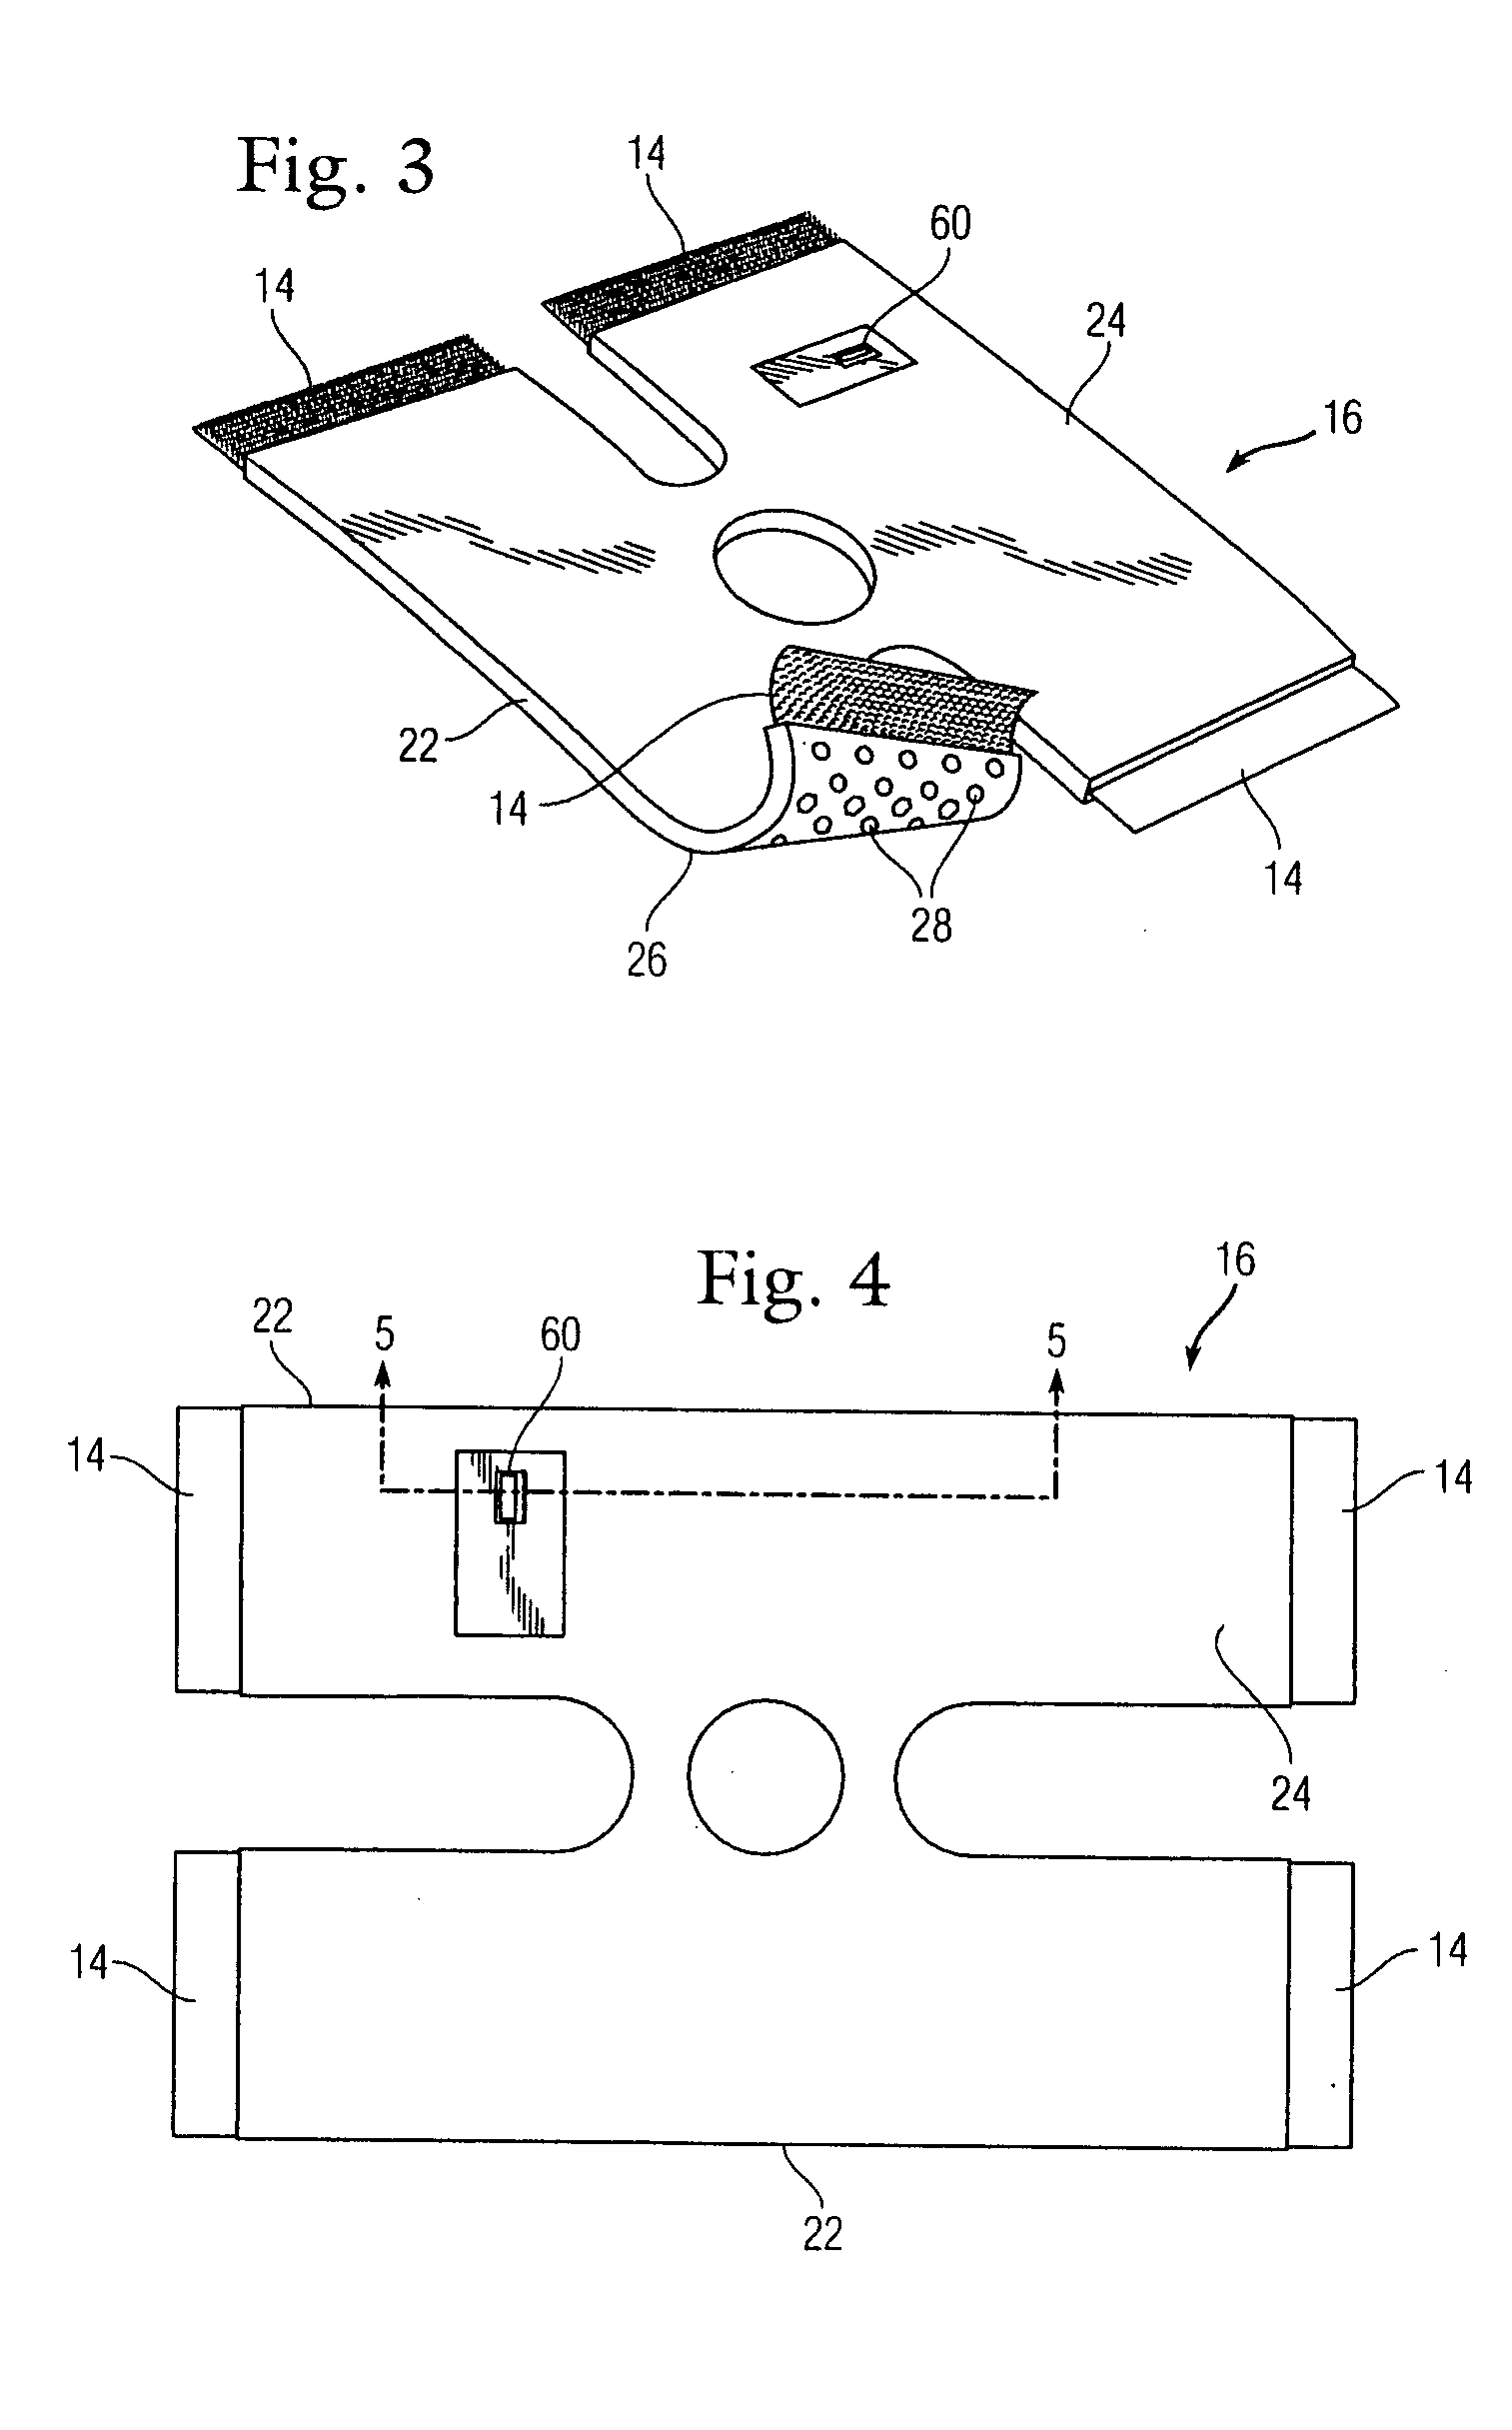 Joint / tissue inflammation therapy and monitoring device